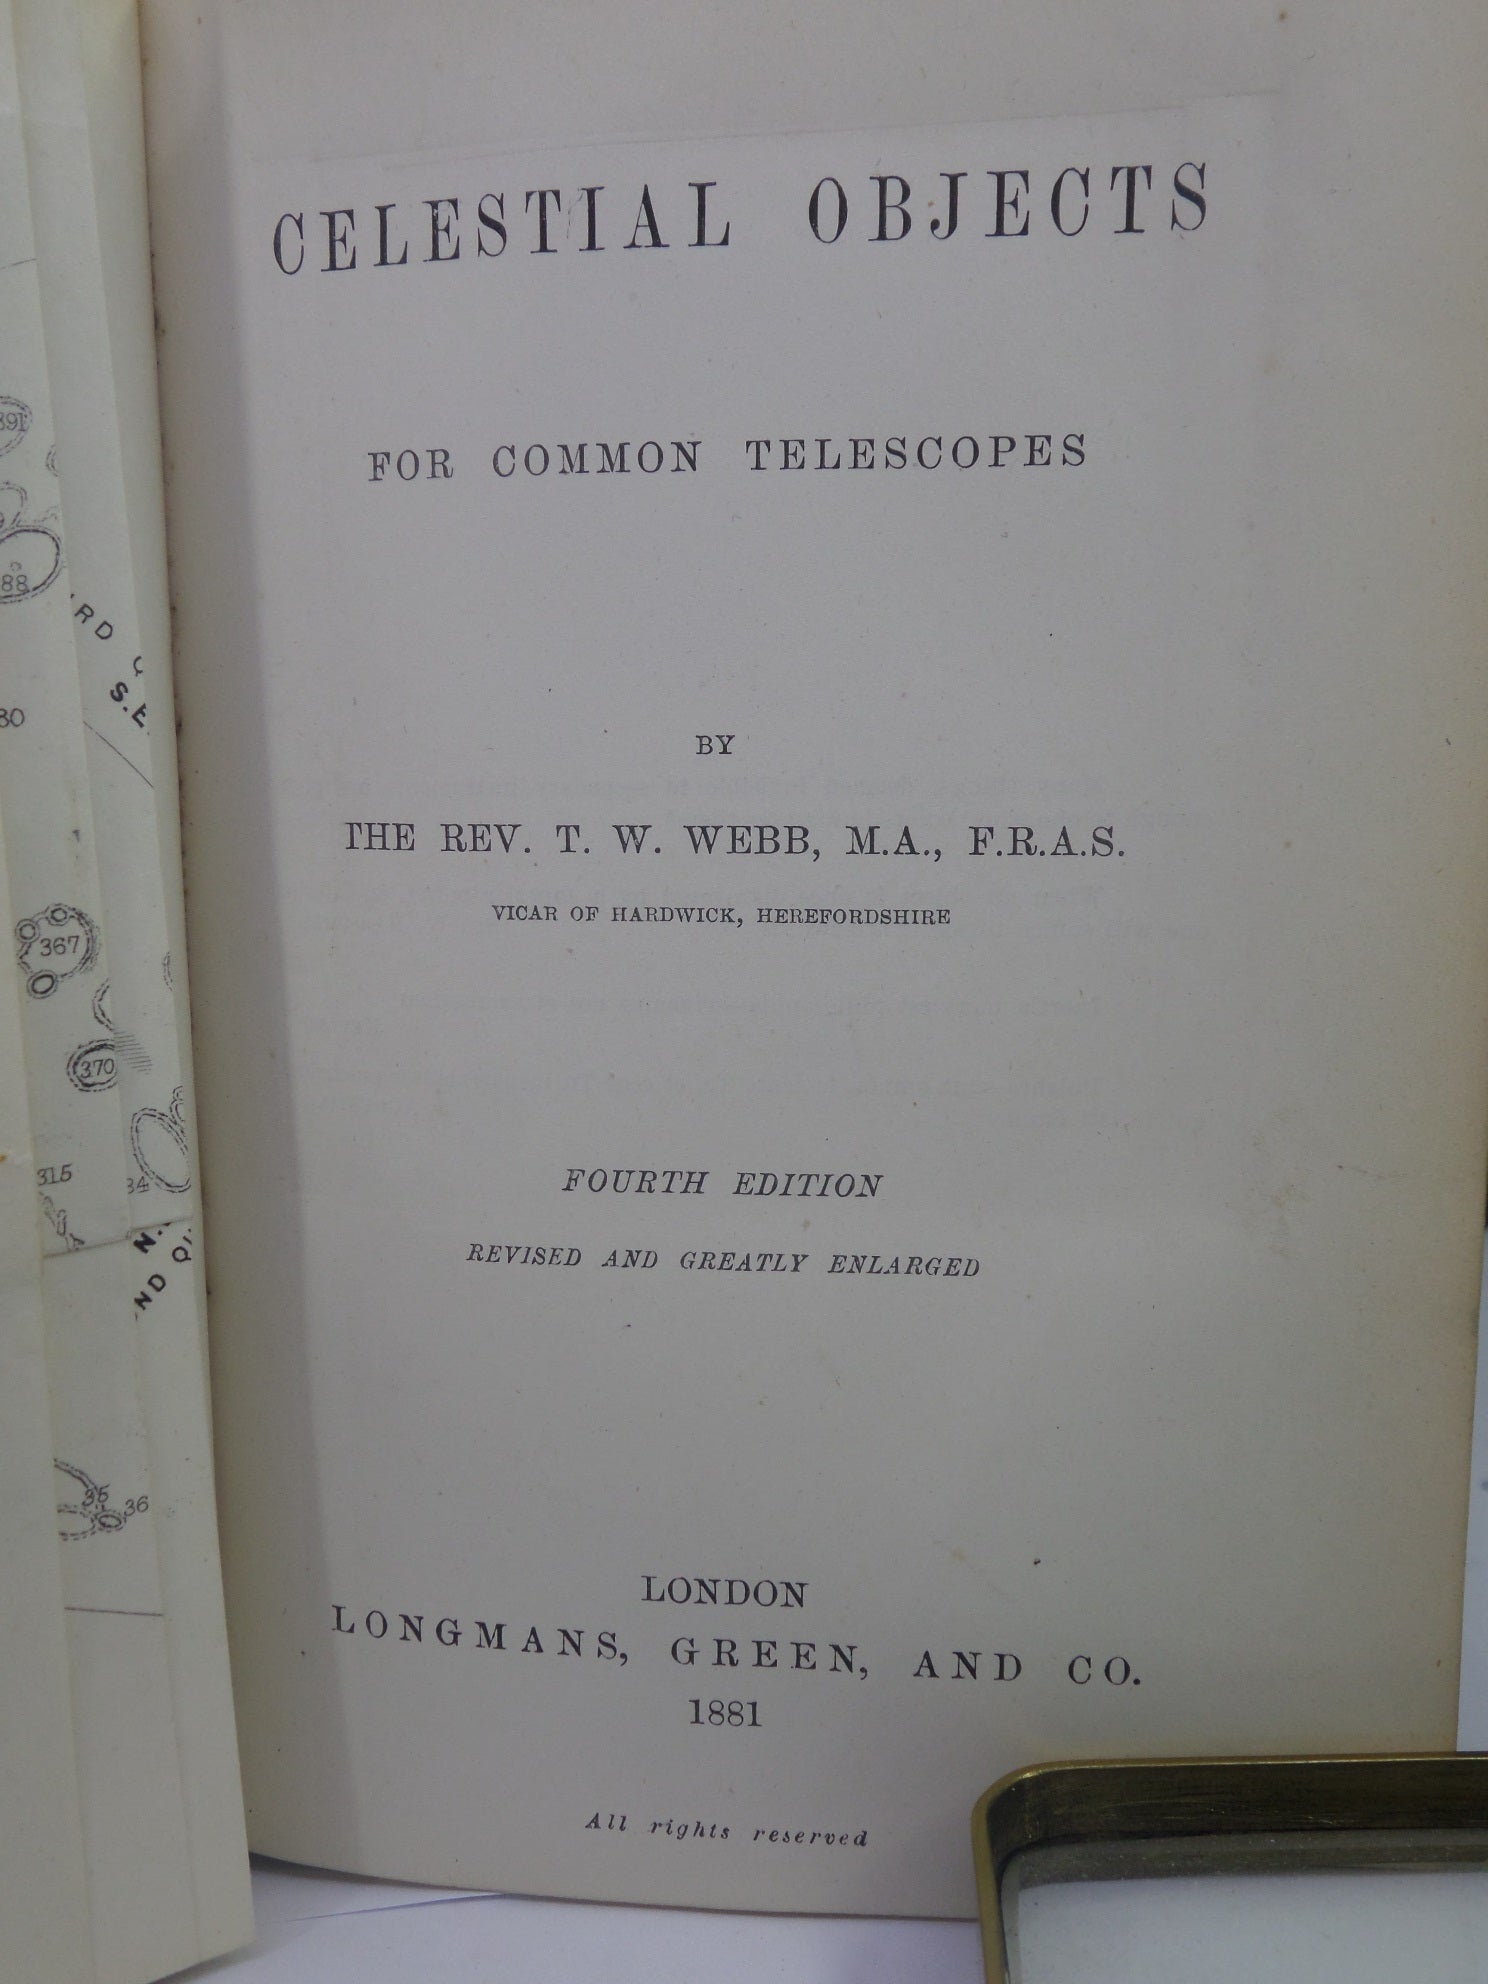 CELESTIAL OBJECTS FOR COMMON TELESCOPES BY T.W. WEBB 1881